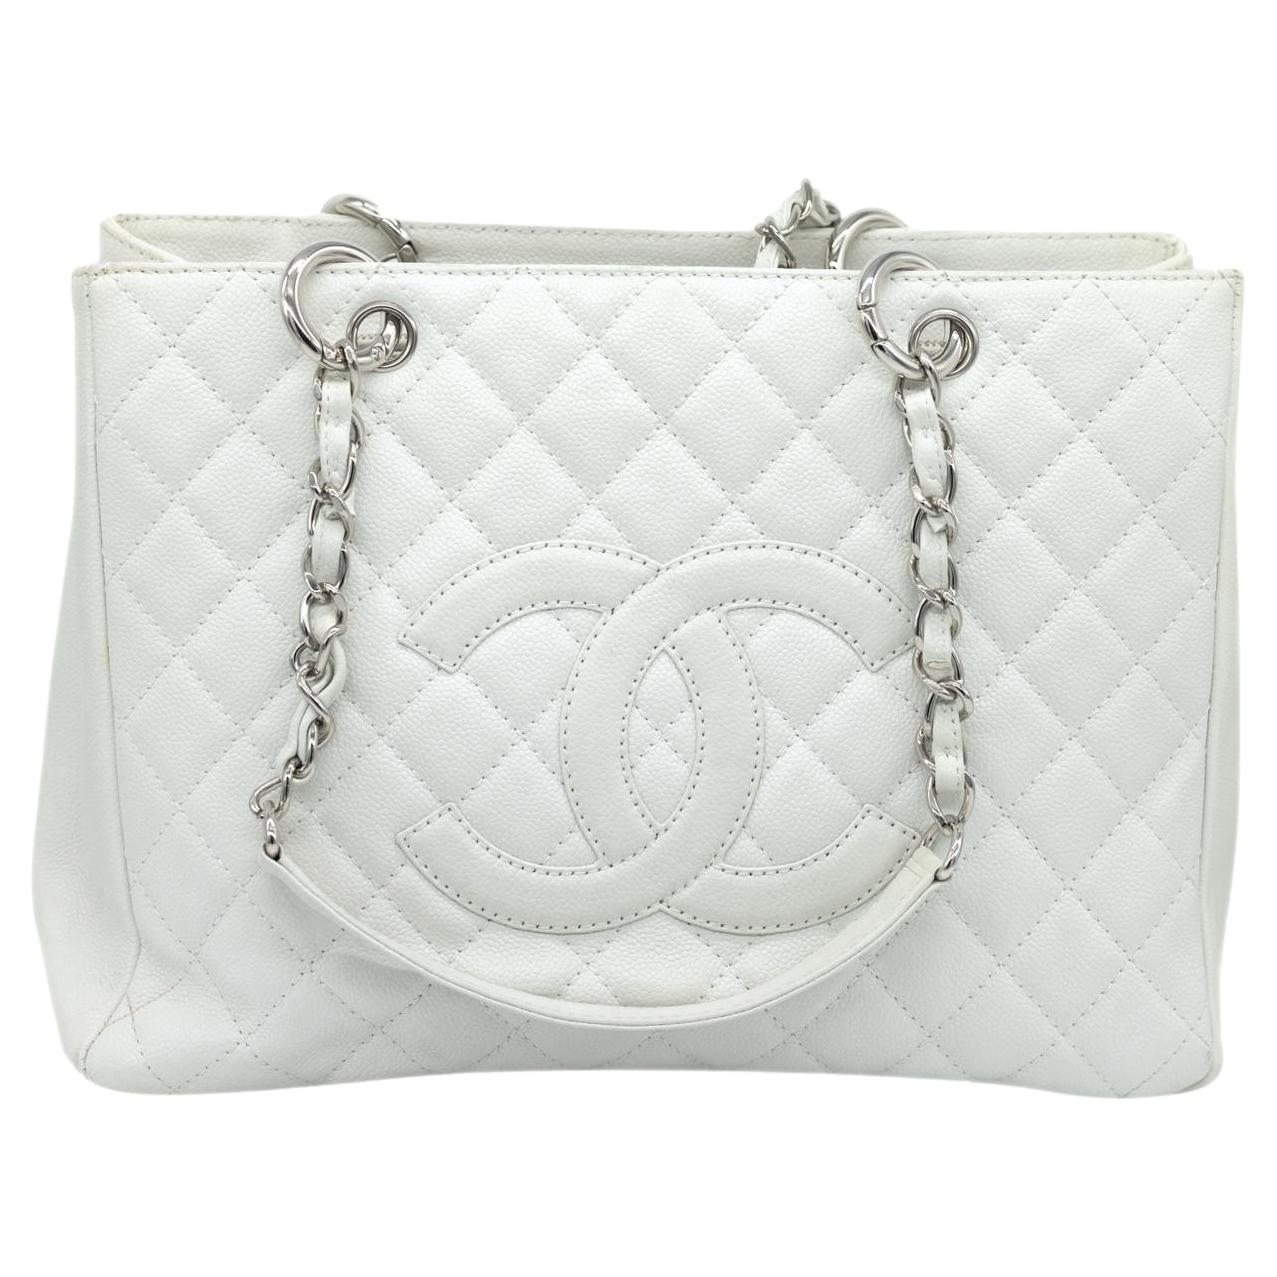 100 Celebs and Their Favorite Chanel Bags - PurseBlog